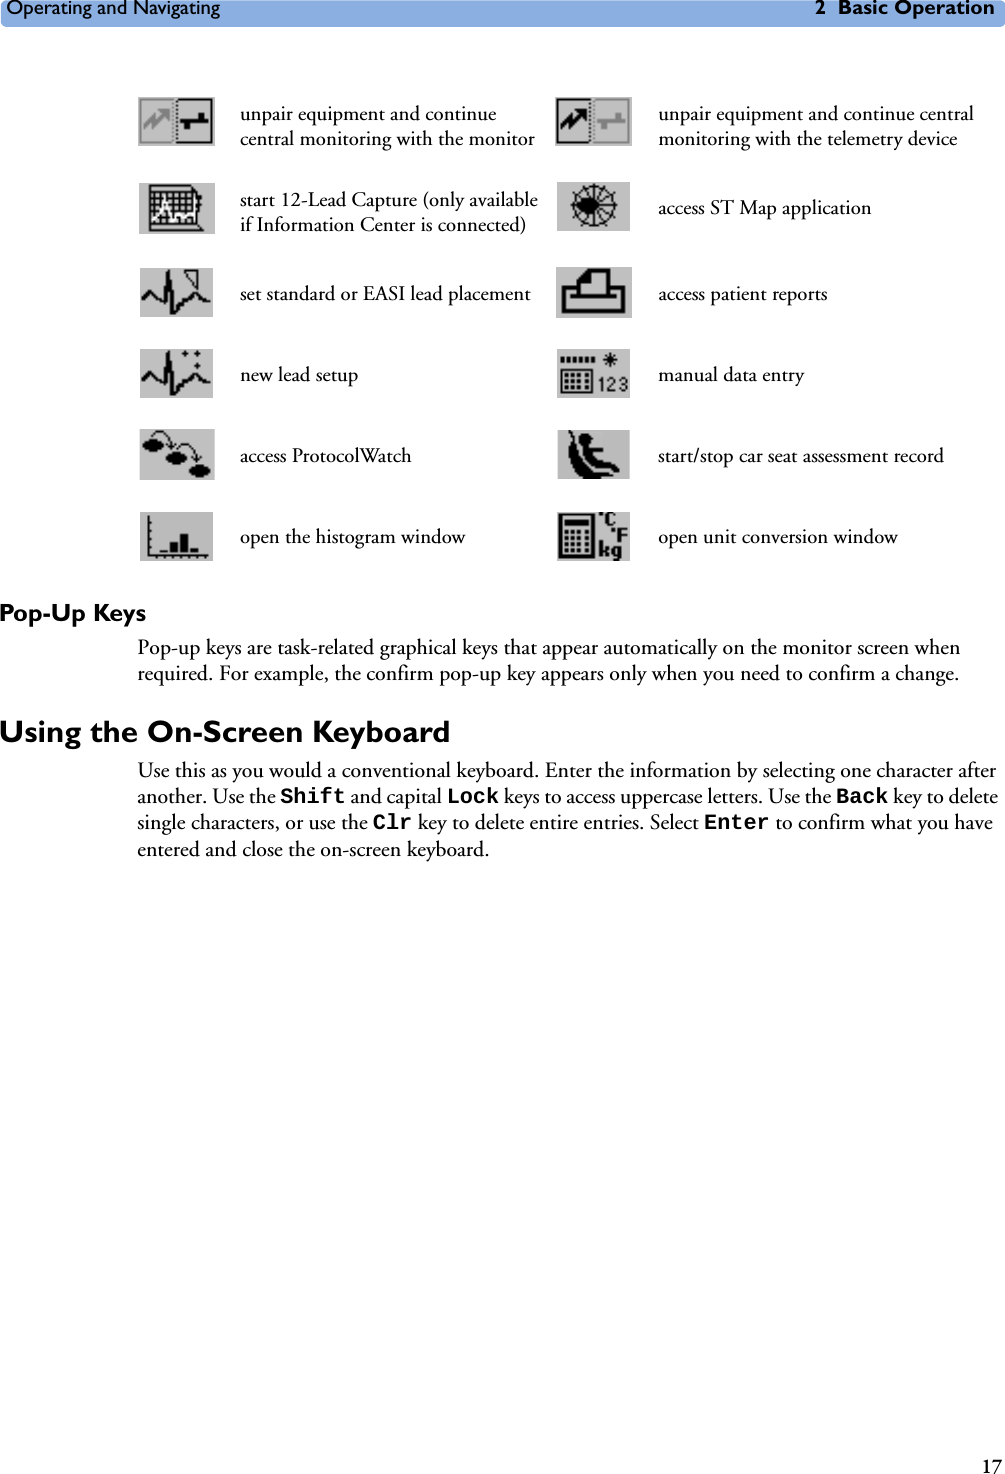 Operating and Navigating 2 Basic Operation17Pop-Up KeysPop-up keys are task-related graphical keys that appear automatically on the monitor screen when required. For example, the confirm pop-up key appears only when you need to confirm a change.Using the On-Screen KeyboardUse this as you would a conventional keyboard. Enter the information by selecting one character after another. Use the Shift and capital Lock keys to access uppercase letters. Use the Back key to delete single characters, or use the Clr key to delete entire entries. Select Enter to confirm what you have entered and close the on-screen keyboard.unpair equipment and continue central monitoring with the monitorunpair equipment and continue central monitoring with the telemetry devicestart 12-Lead Capture (only available if Information Center is connected) access ST Map applicationset standard or EASI lead placement access patient reportsnew lead setup manual data entryaccess ProtocolWatch start/stop car seat assessment recordopen the histogram window open unit conversion window